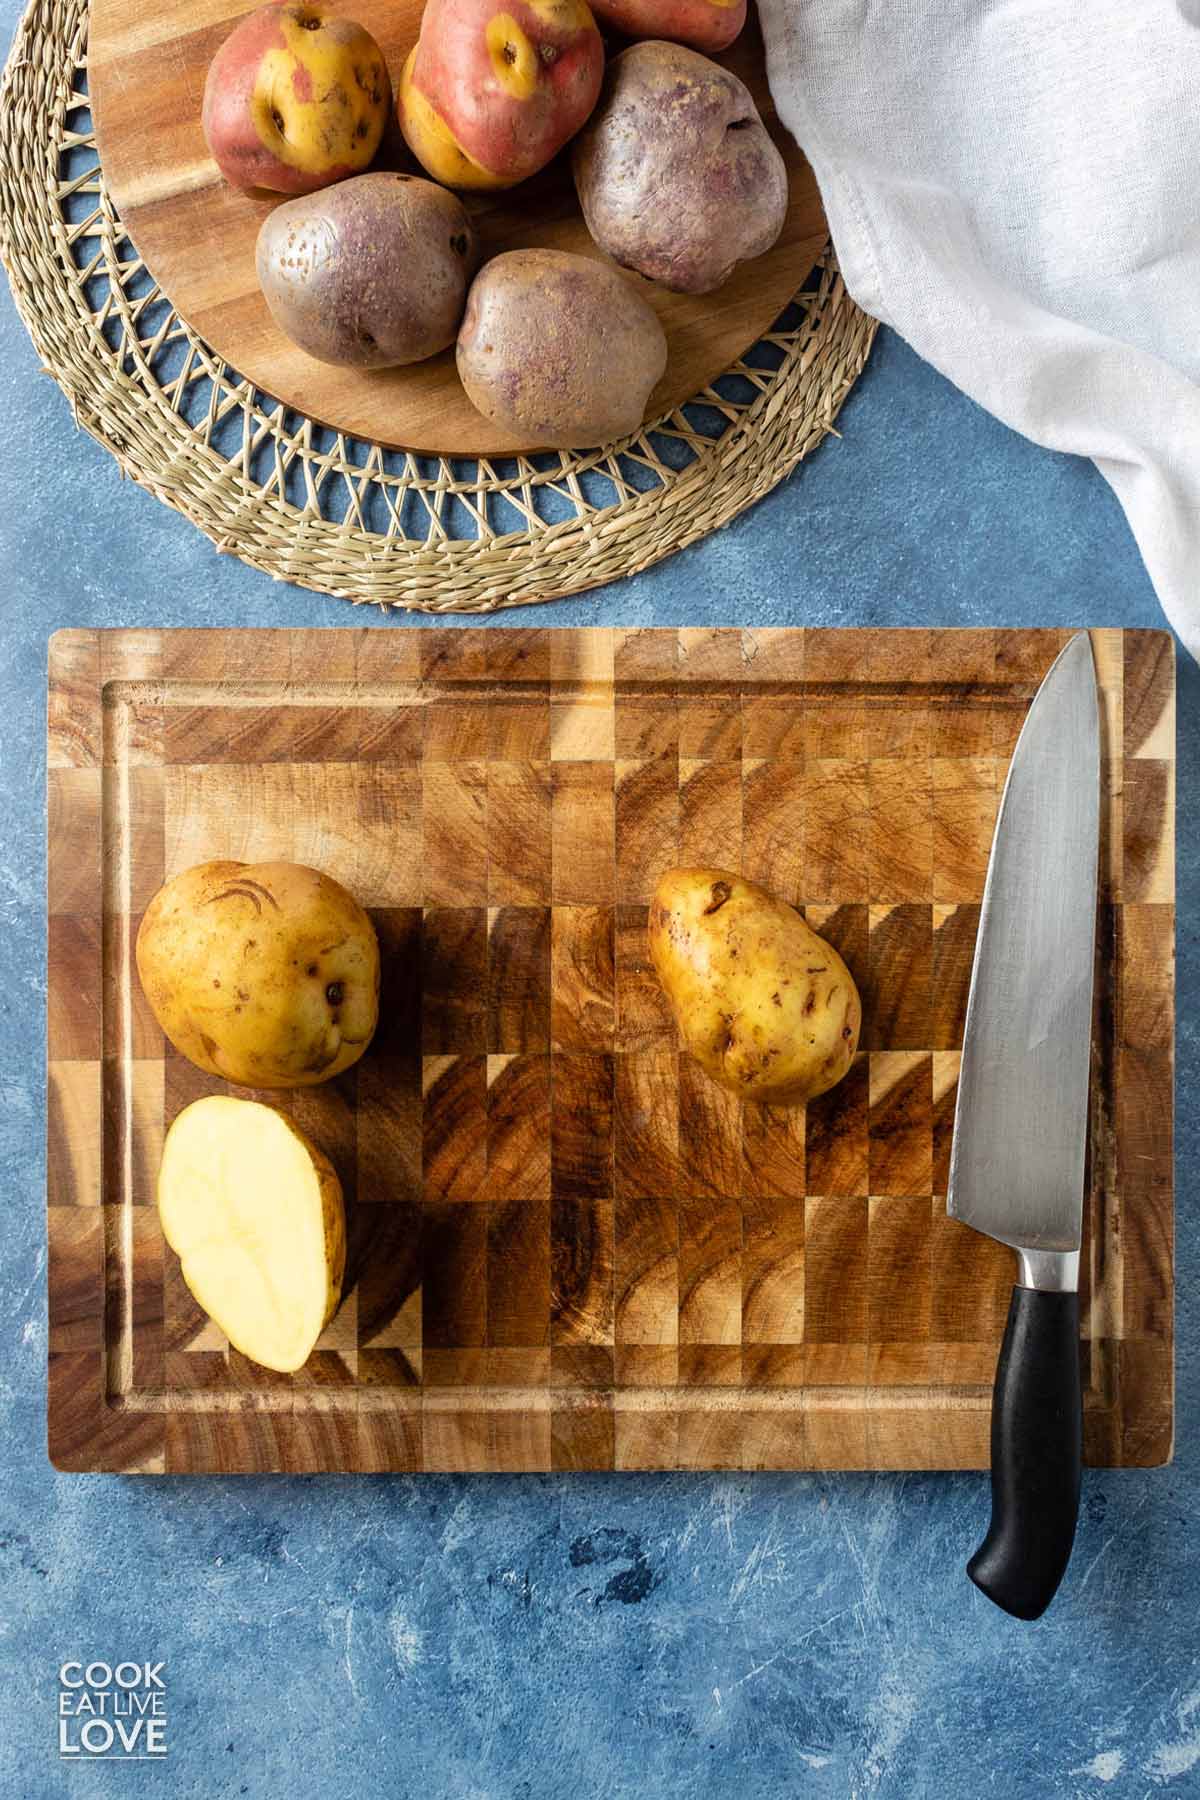 Flat side of potato turned over on the cutting board.